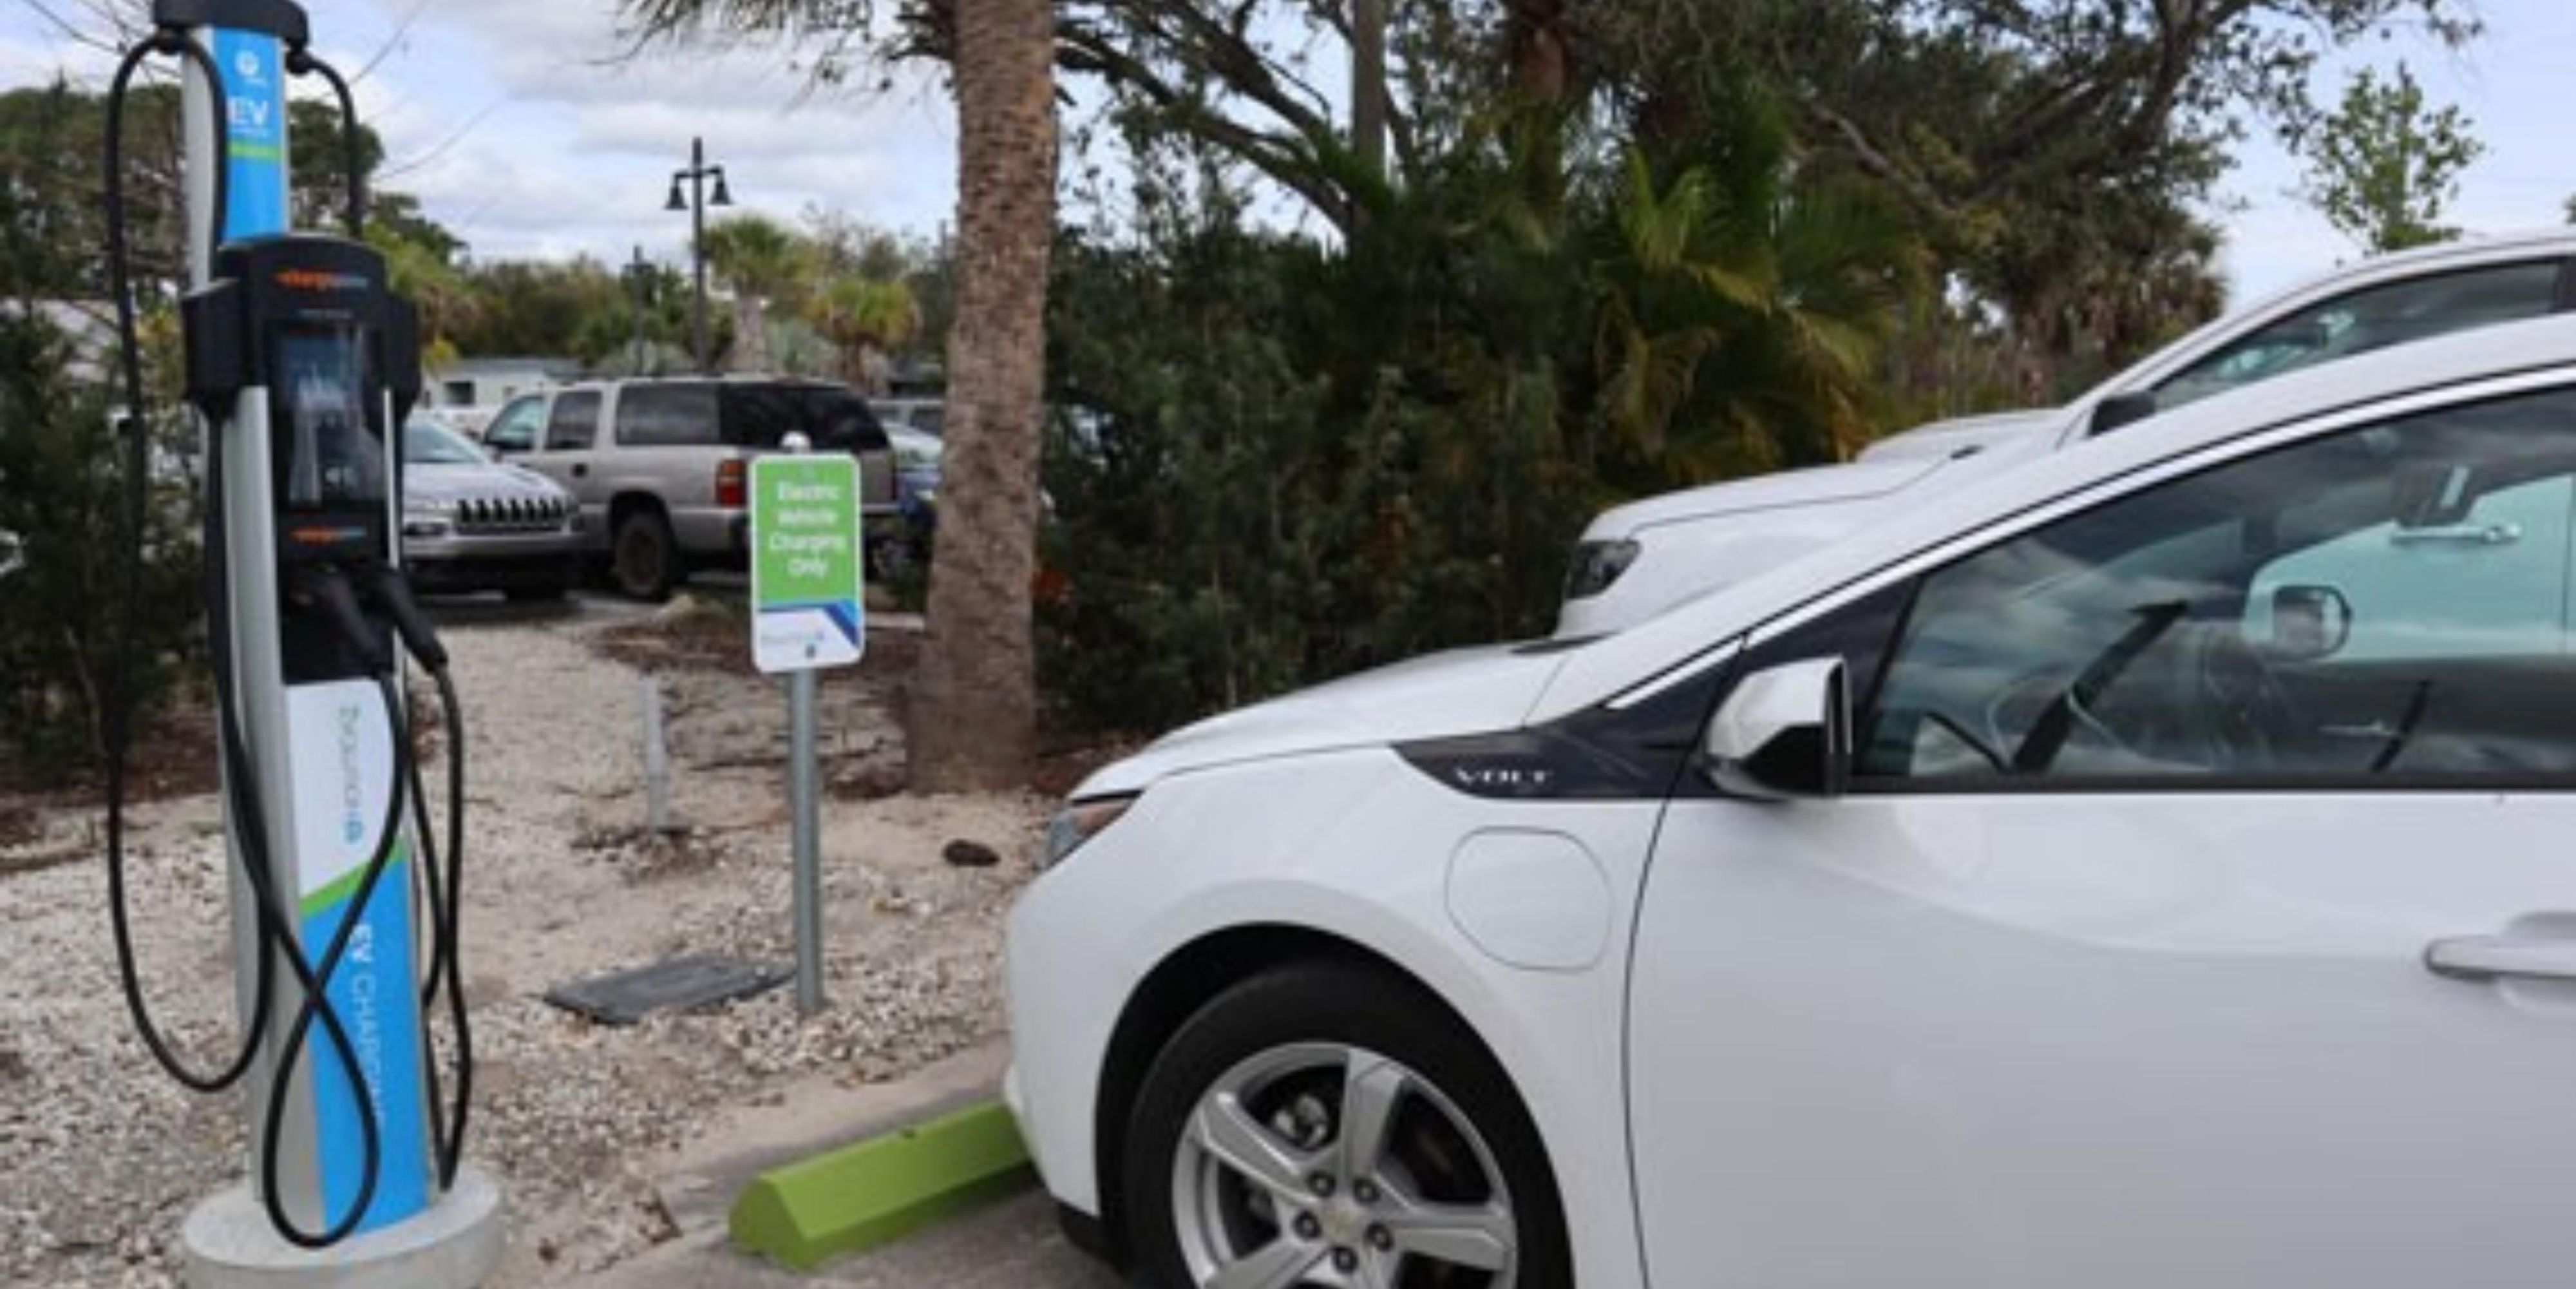 We are happy to be going green and have EV Charging Stations at the hotel for guest use at a fee. So let your car charge while you get a great night's sleep and recharge!